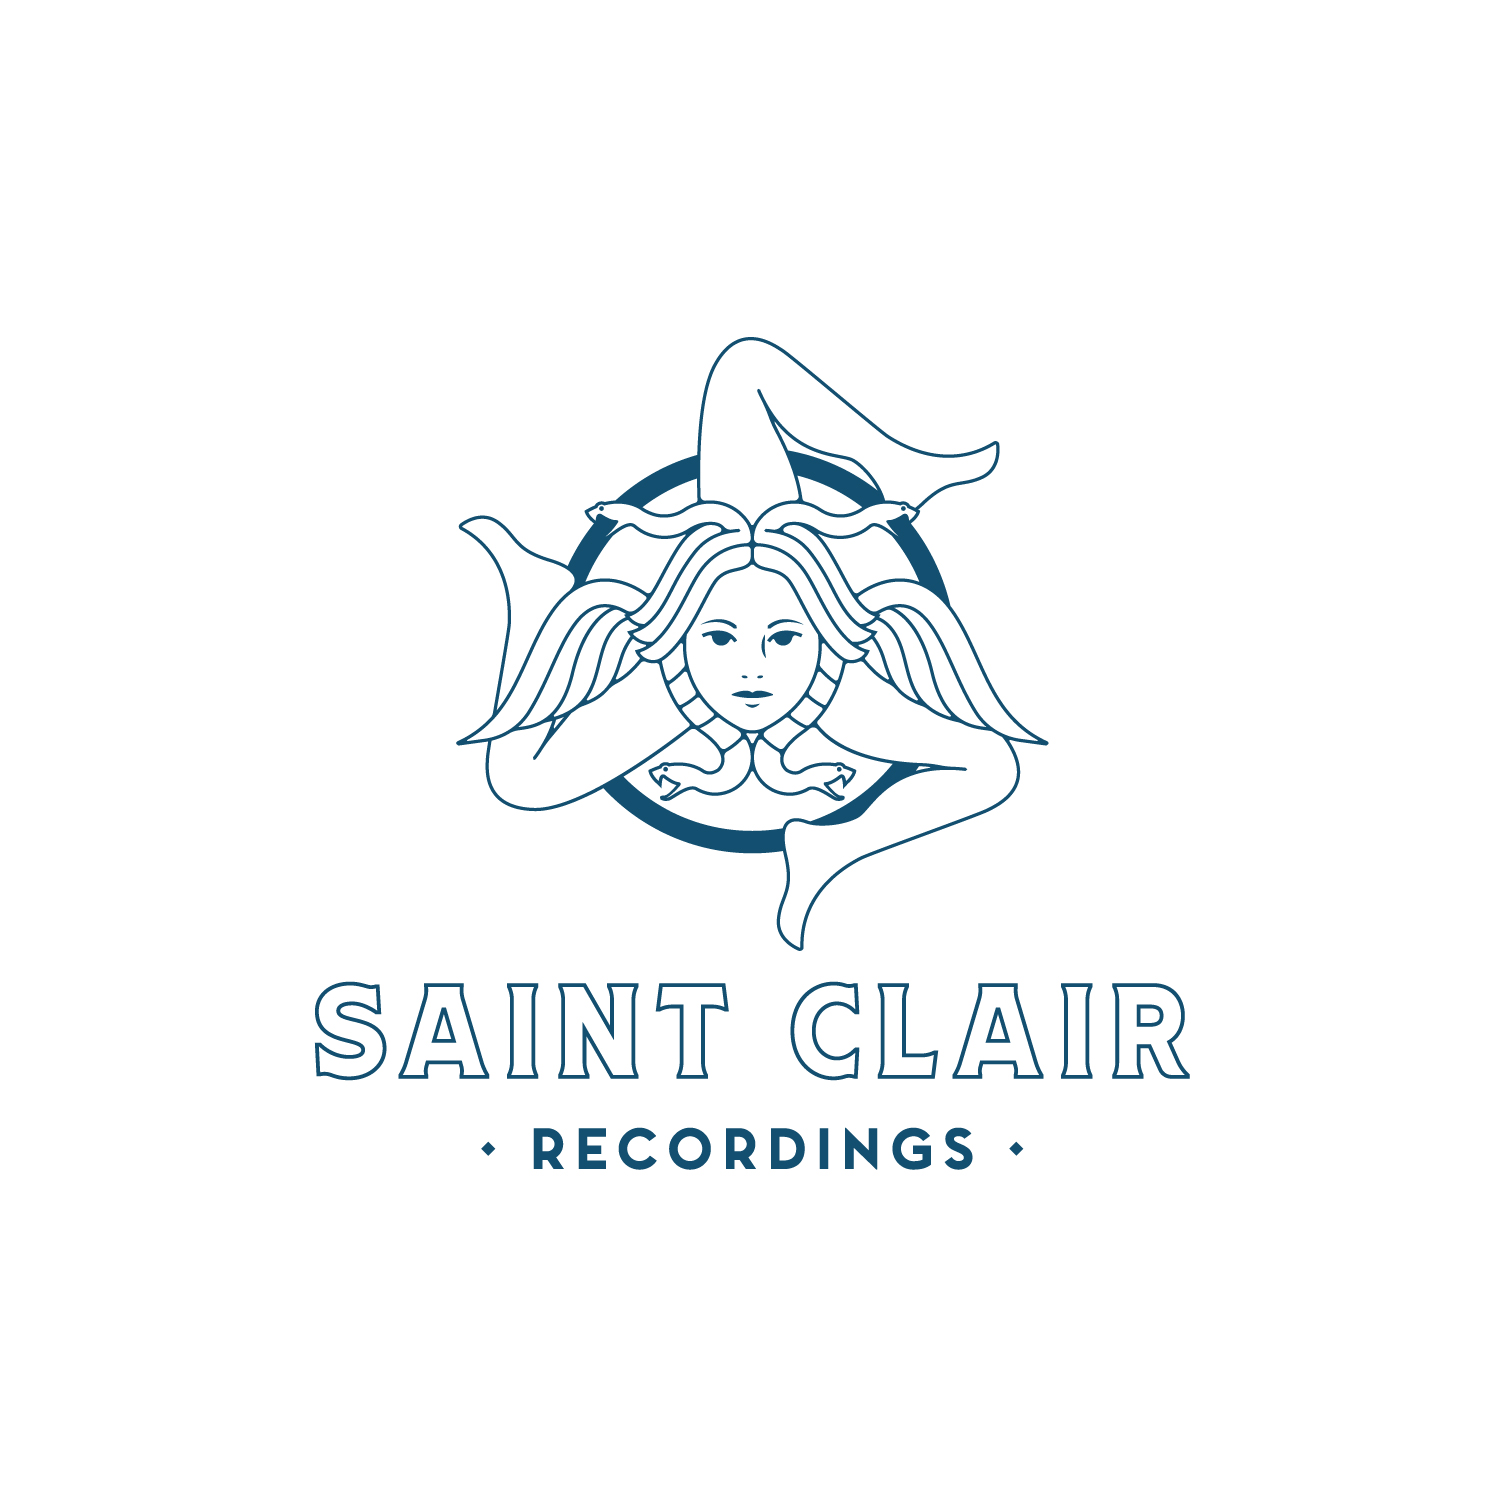 Saint Clair Recordings Logo logo design by logo designer Mirka Studios for your inspiration and for the worlds largest logo competition